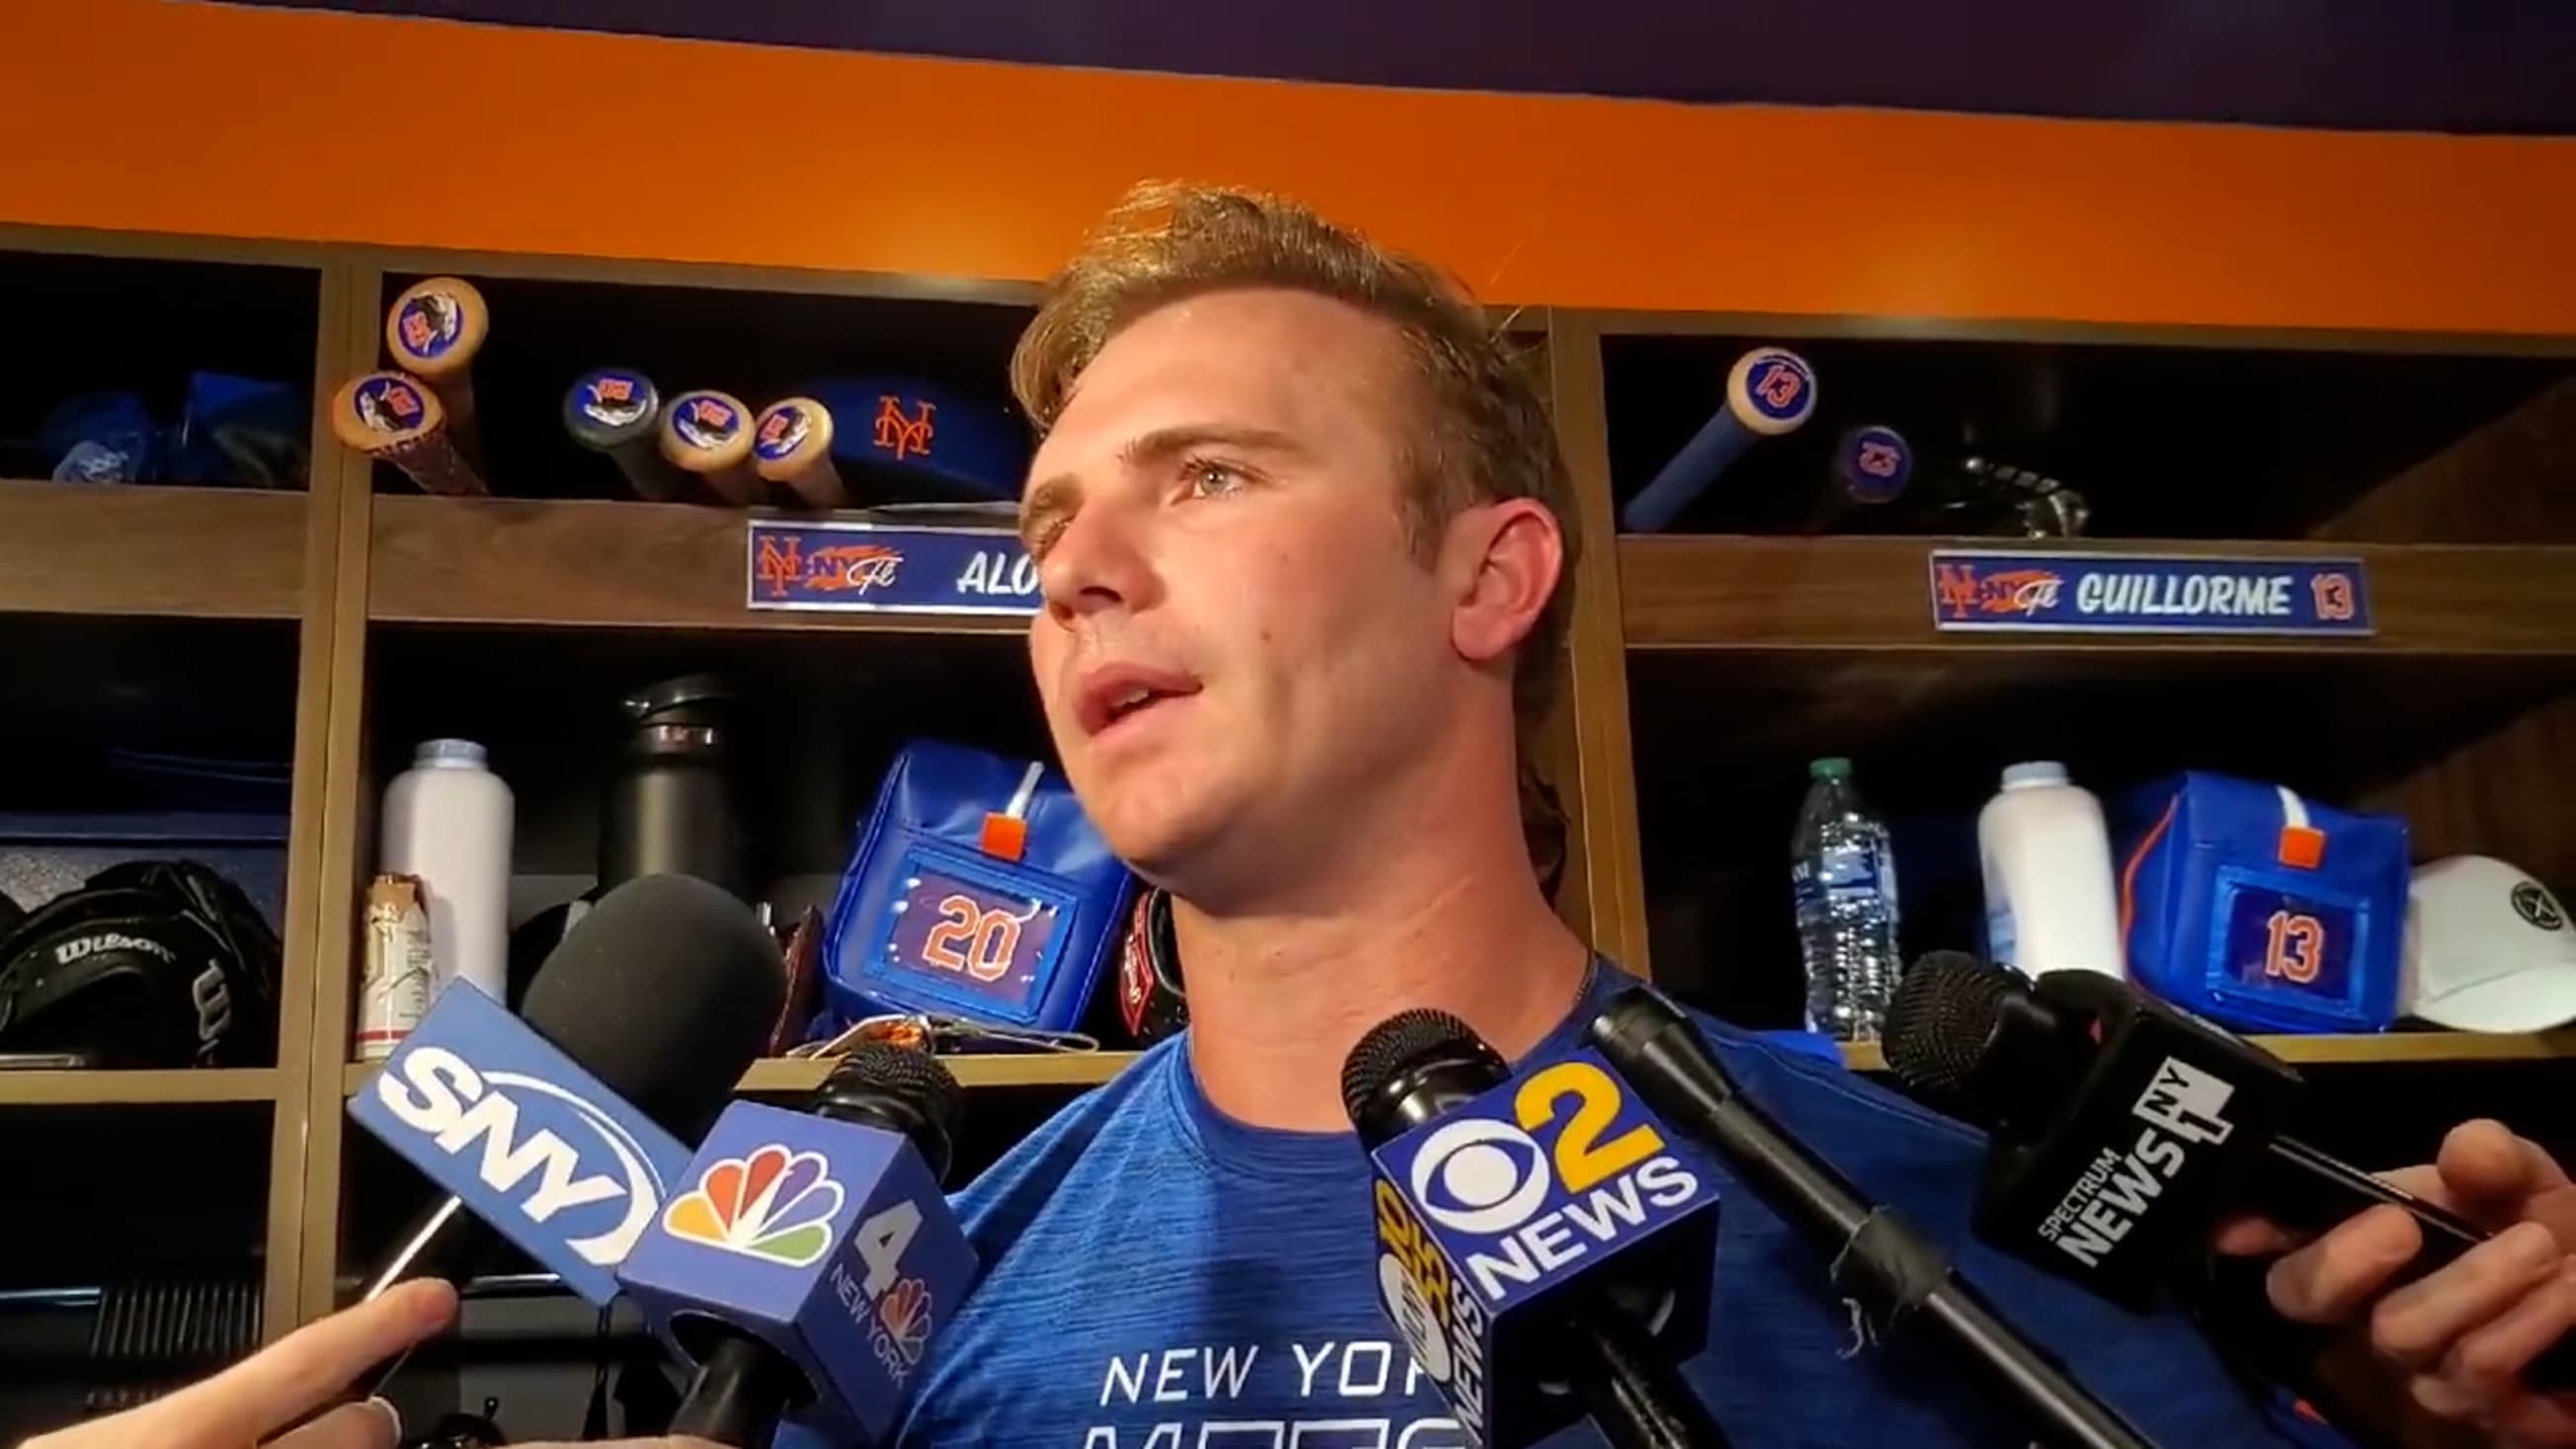 Pete Alonso's wife shares players car crash video